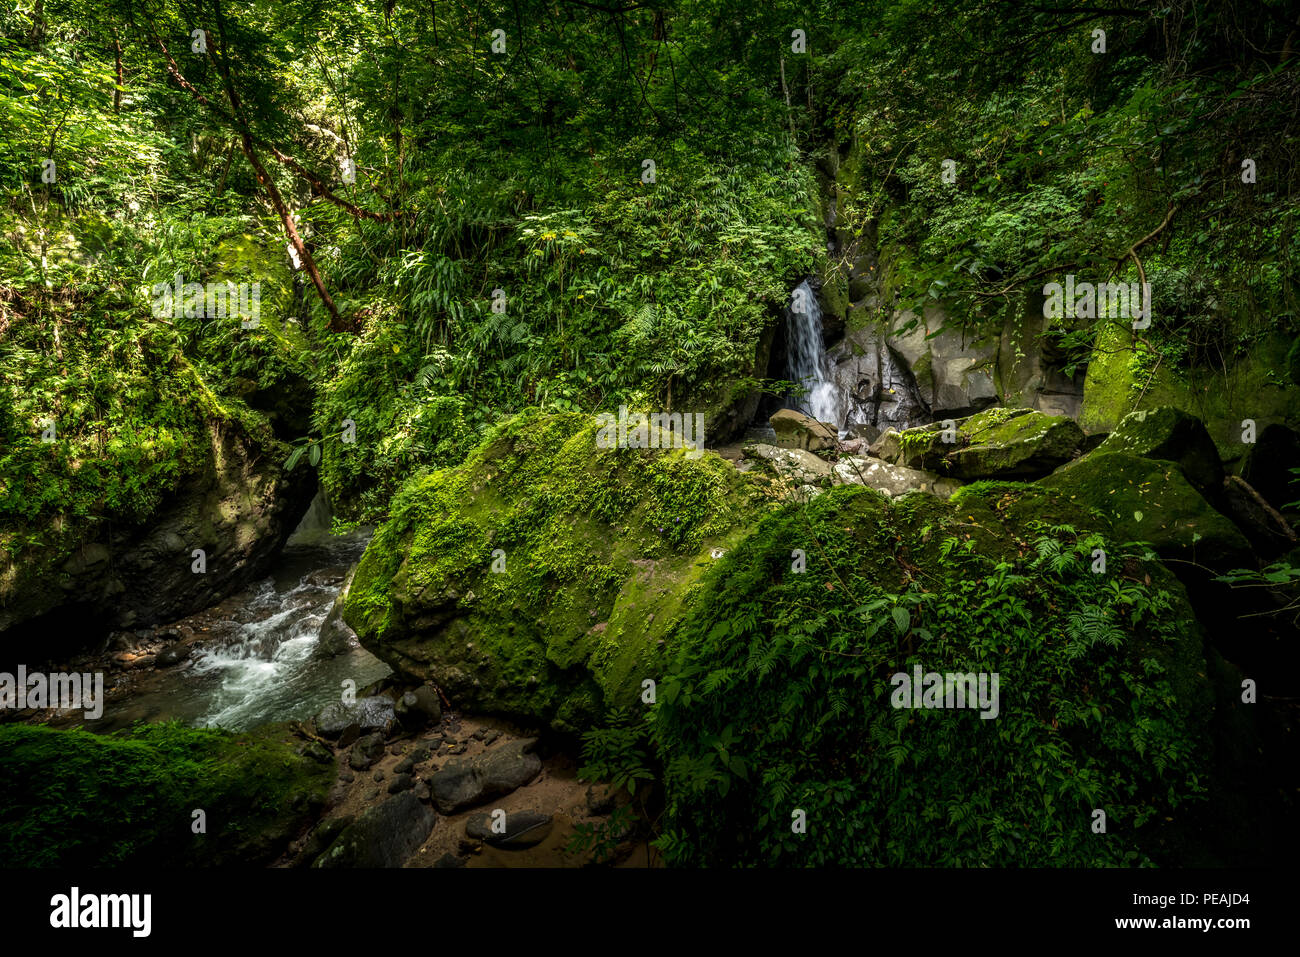 Small river or creek with small waterfall nature scenery landscape Stock Photo